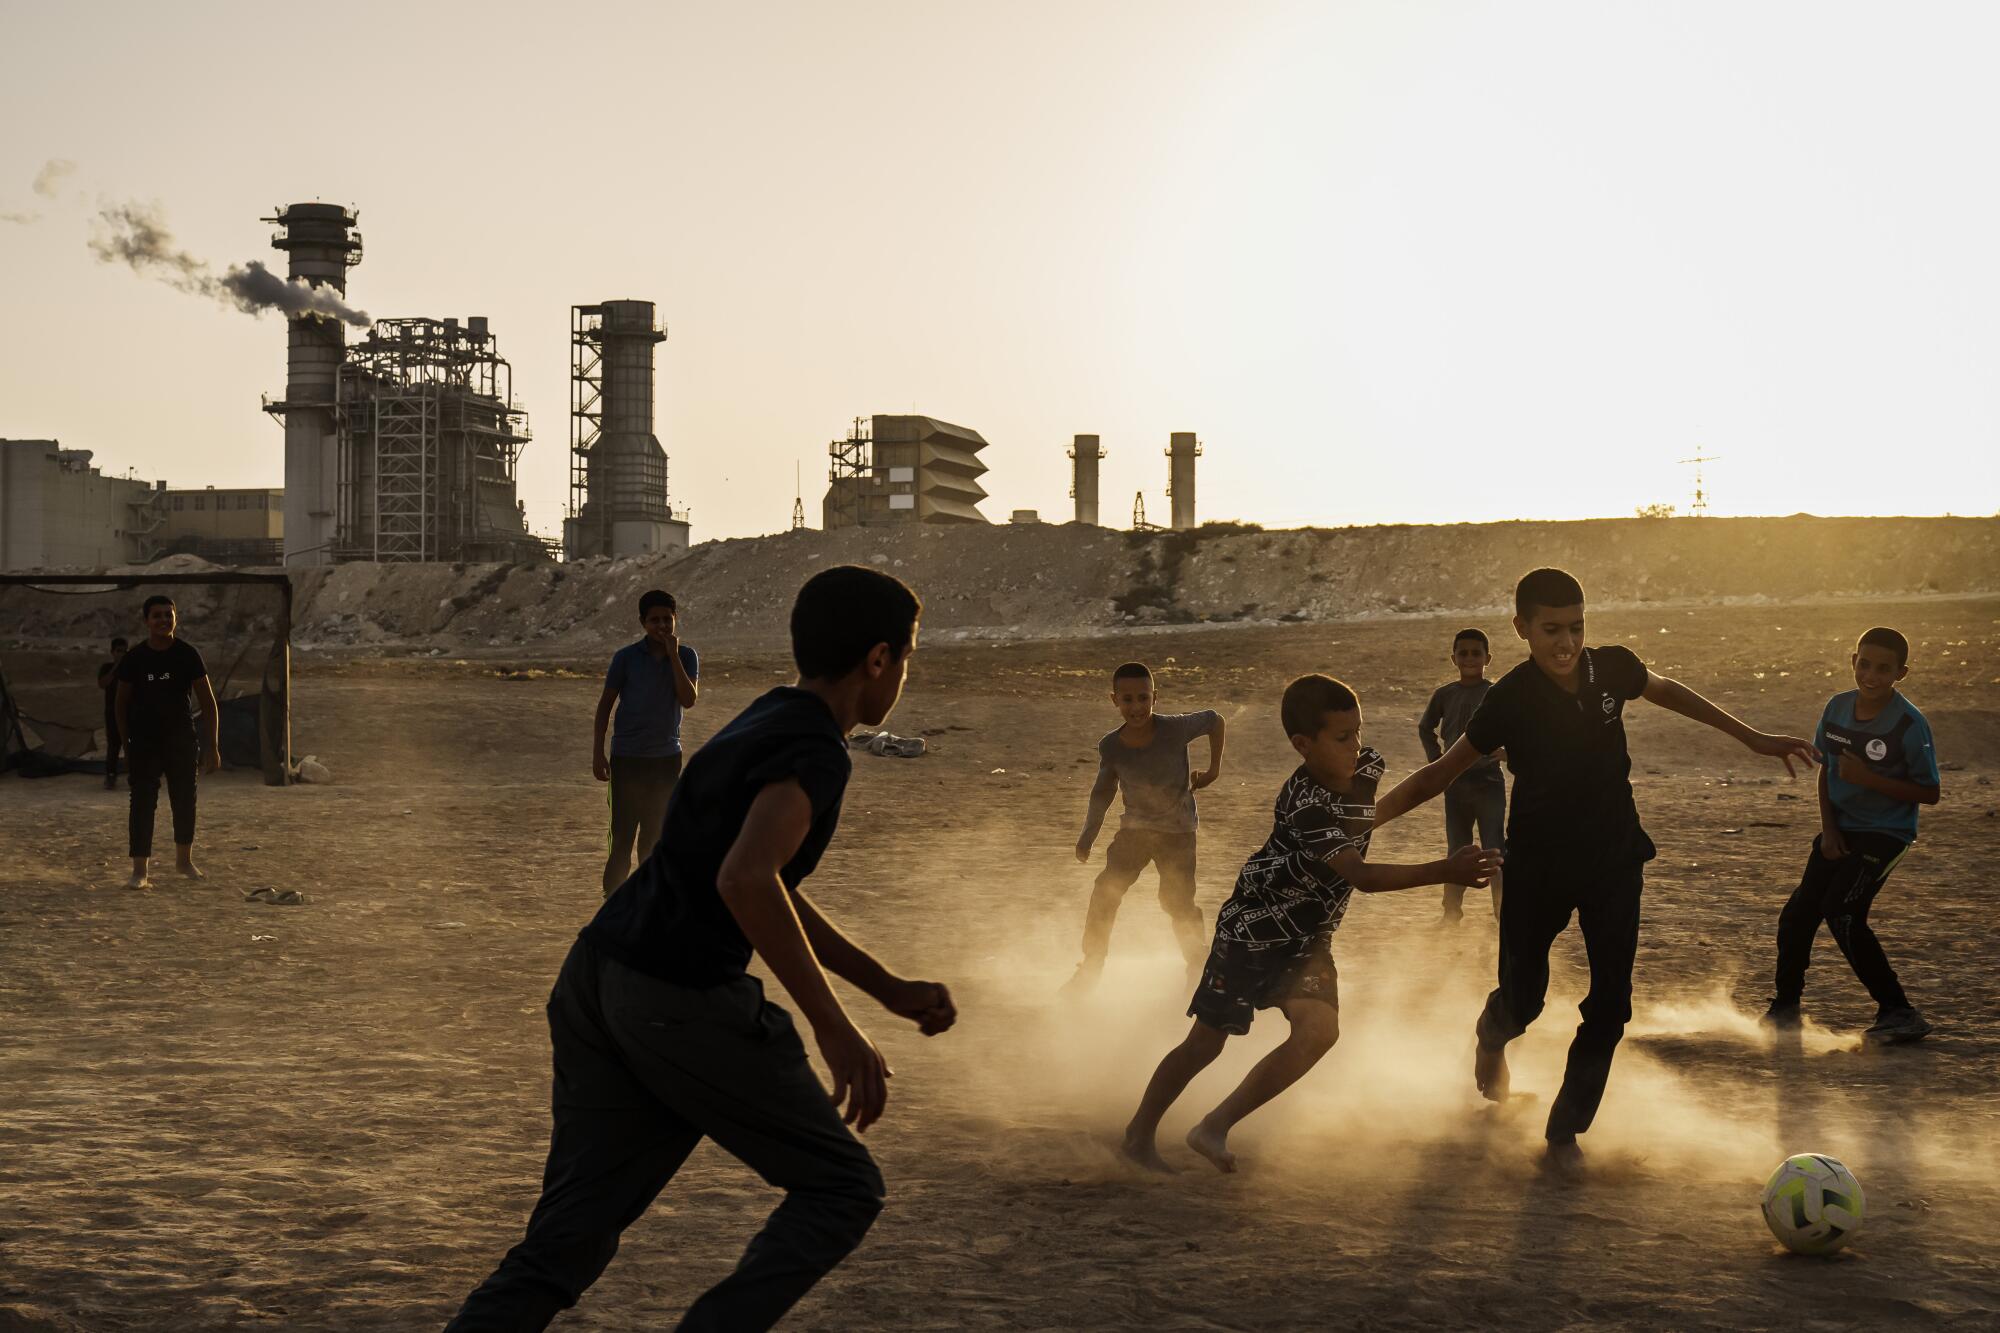 Children kick up dust as they play soccer at sunset in the desert, with a power plant in the distance.